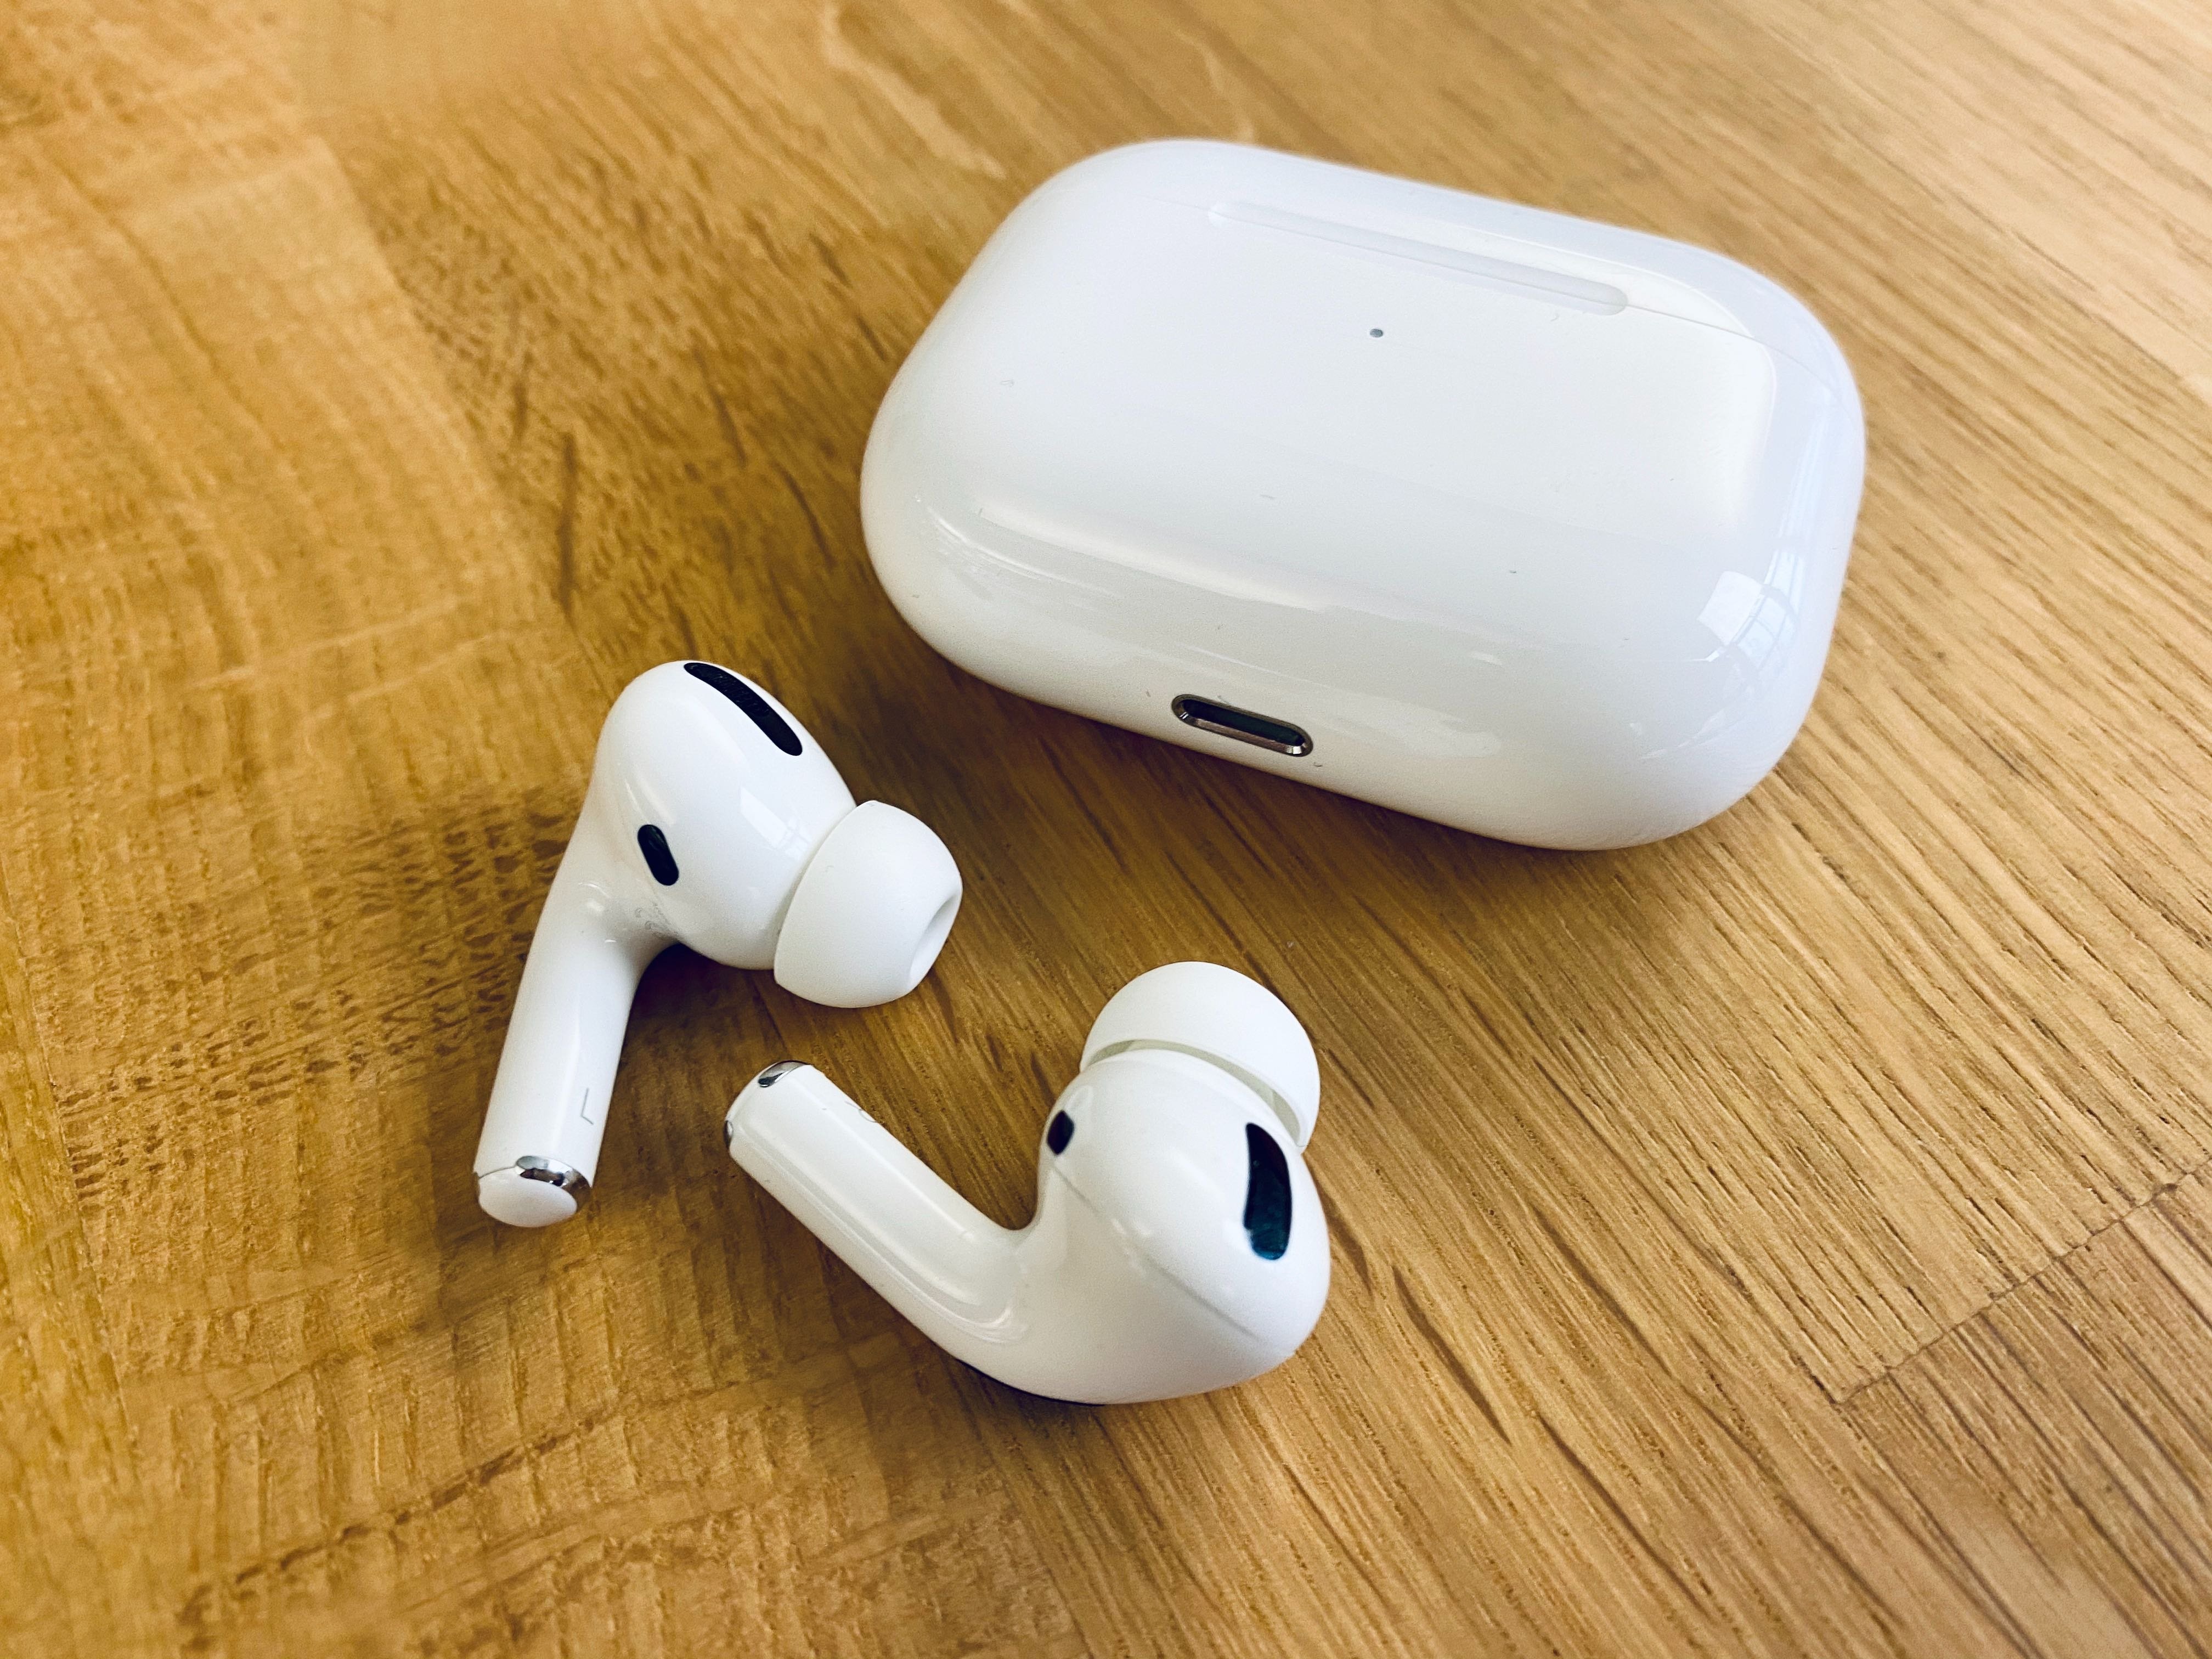 Apple AIRPODS 2. AIRPODS Samsung Galaxy. Apple AIRPODS Pro 2. AIRPODS Pro 2nd Generation.